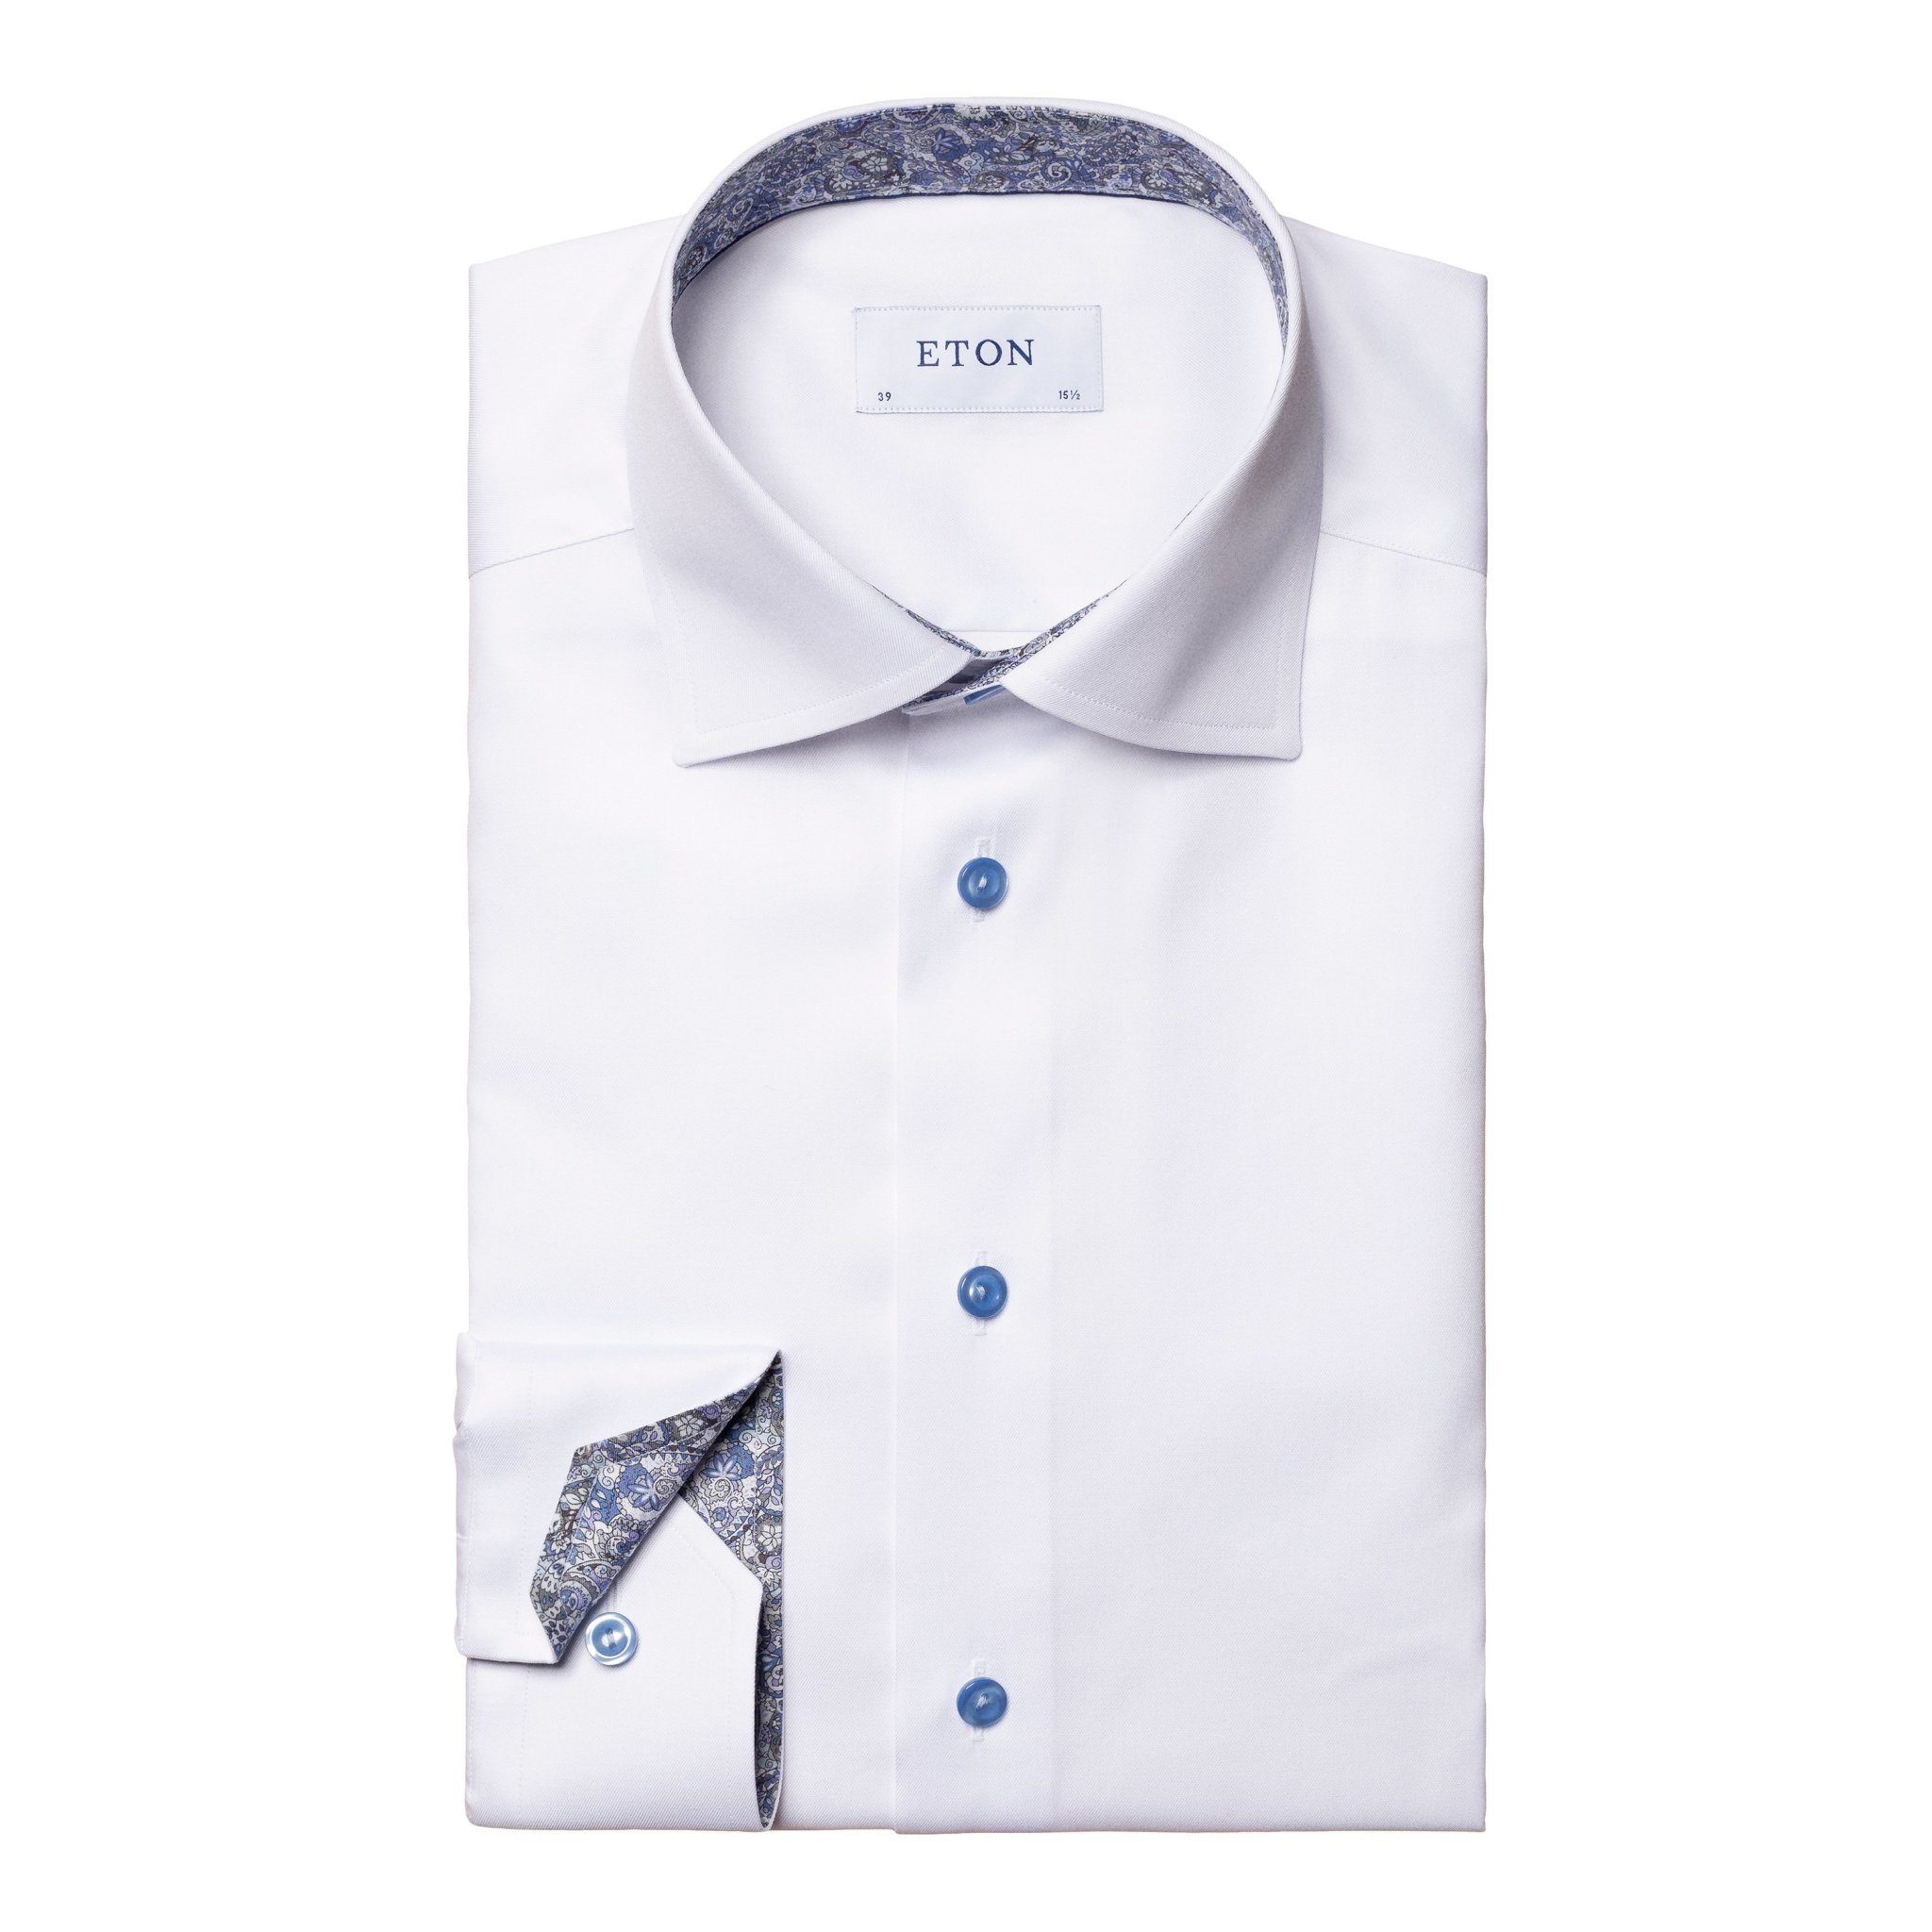 Eton Signature Twill with trim and contrast button